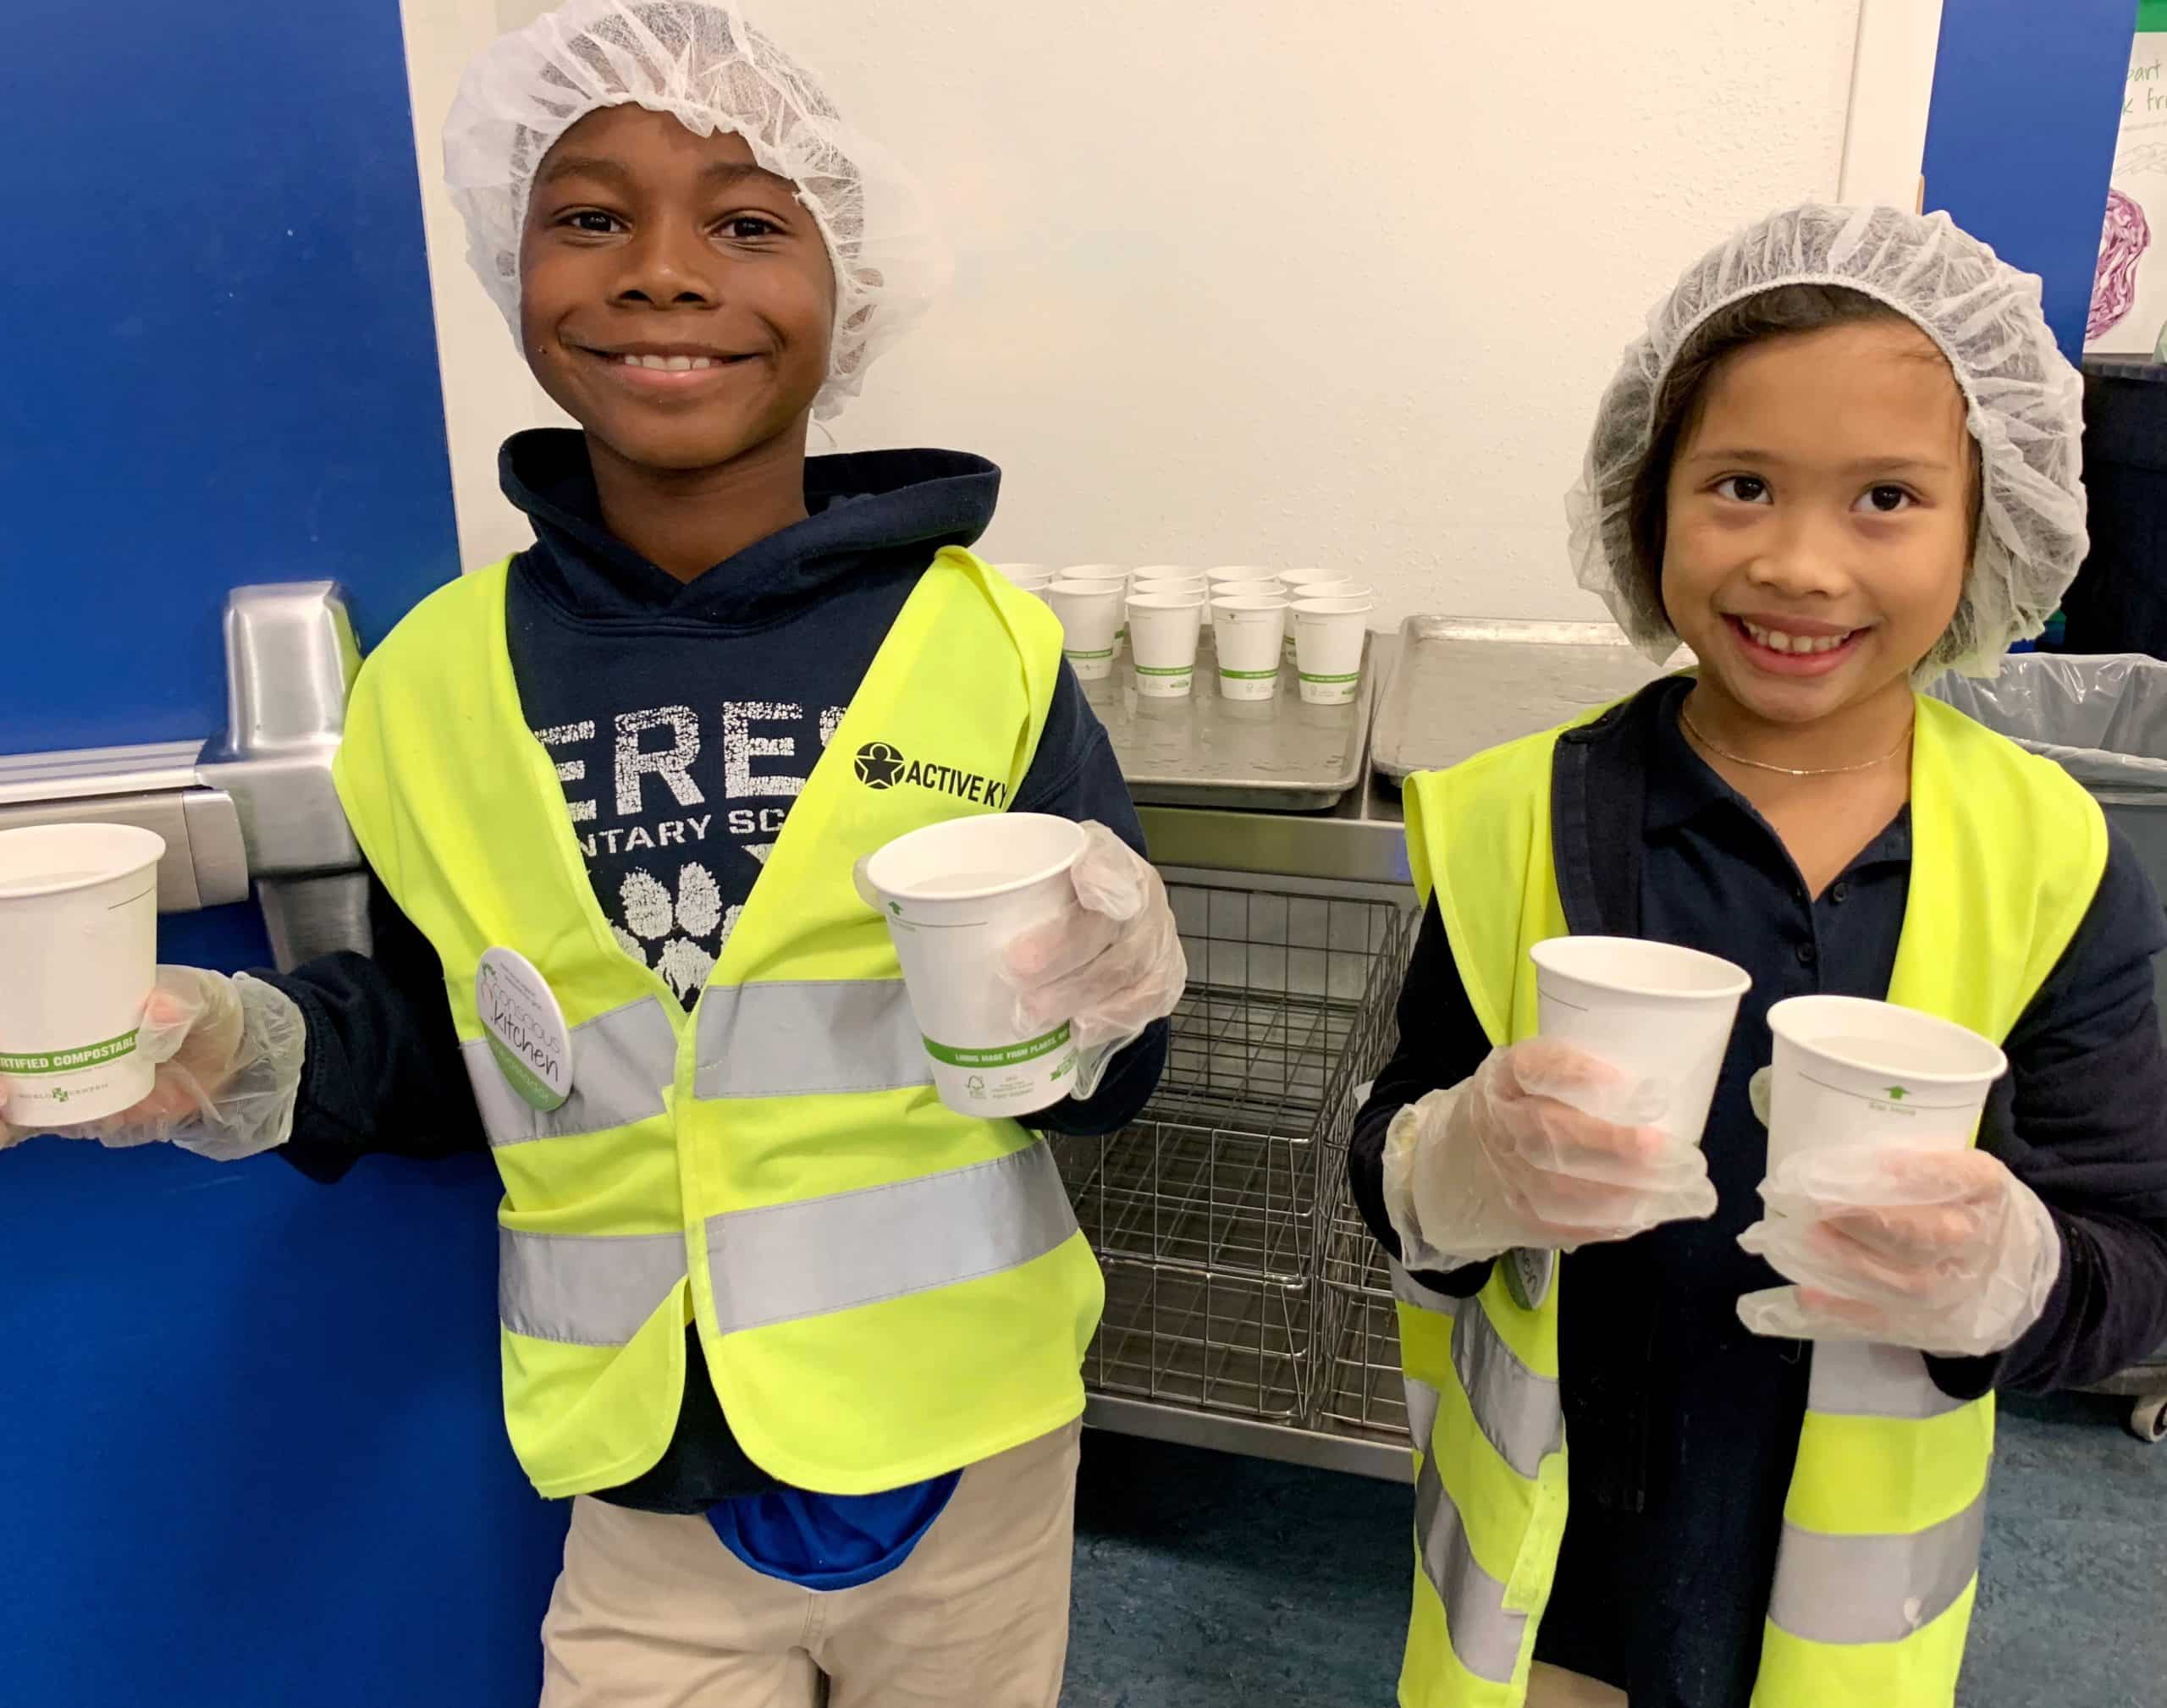 Two students in yellow safety vests, hair nets, and gloves are holding cups of organic milk and smiling at the camera.